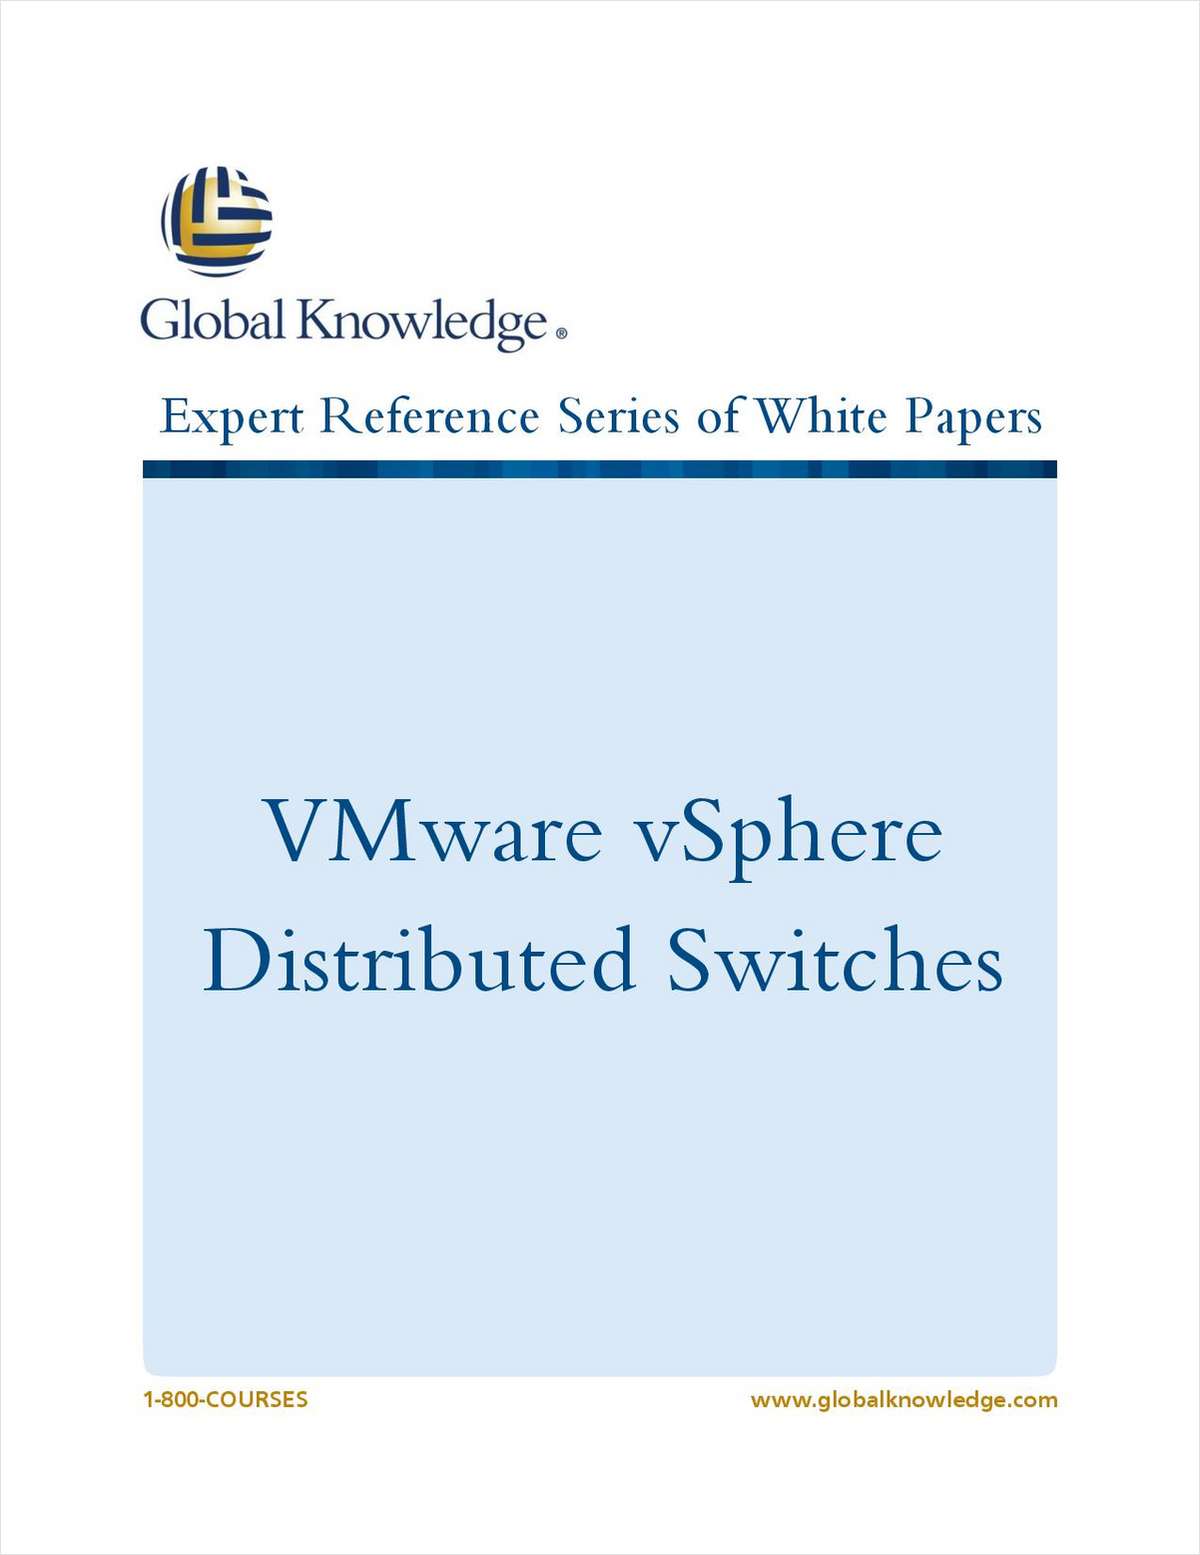 VMware vSphere Distributed Switches